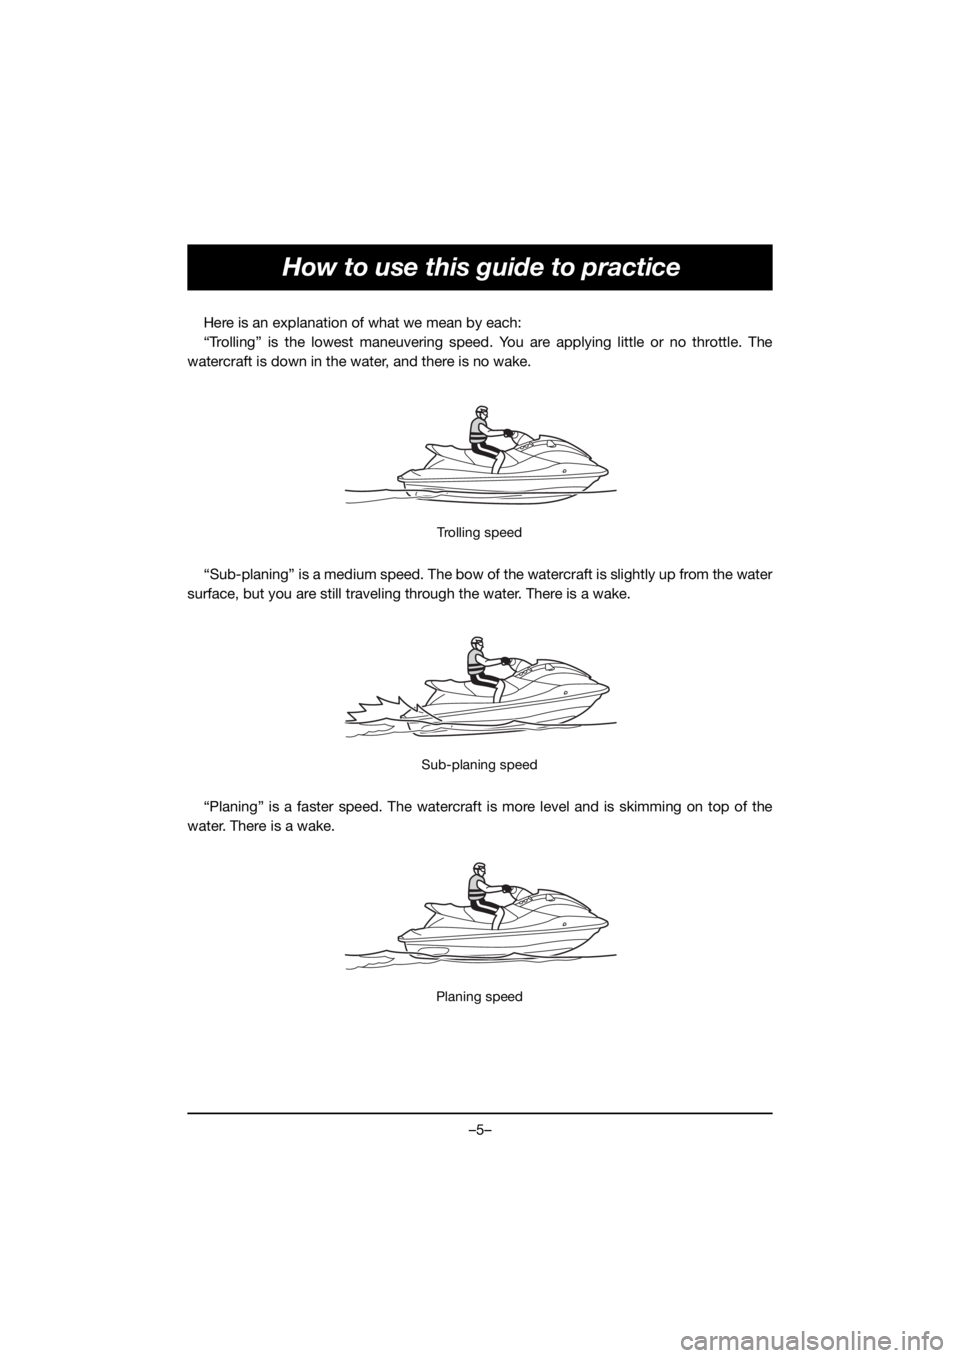 YAMAHA FJR1300 2020  Manuale de Empleo (in Spanish) –5–
How to use this guide to practice
Here is an explanation of what we mean by each:
“Trolling” is the lowest maneuvering speed. You are applying little or no throttle. The
watercraft is down